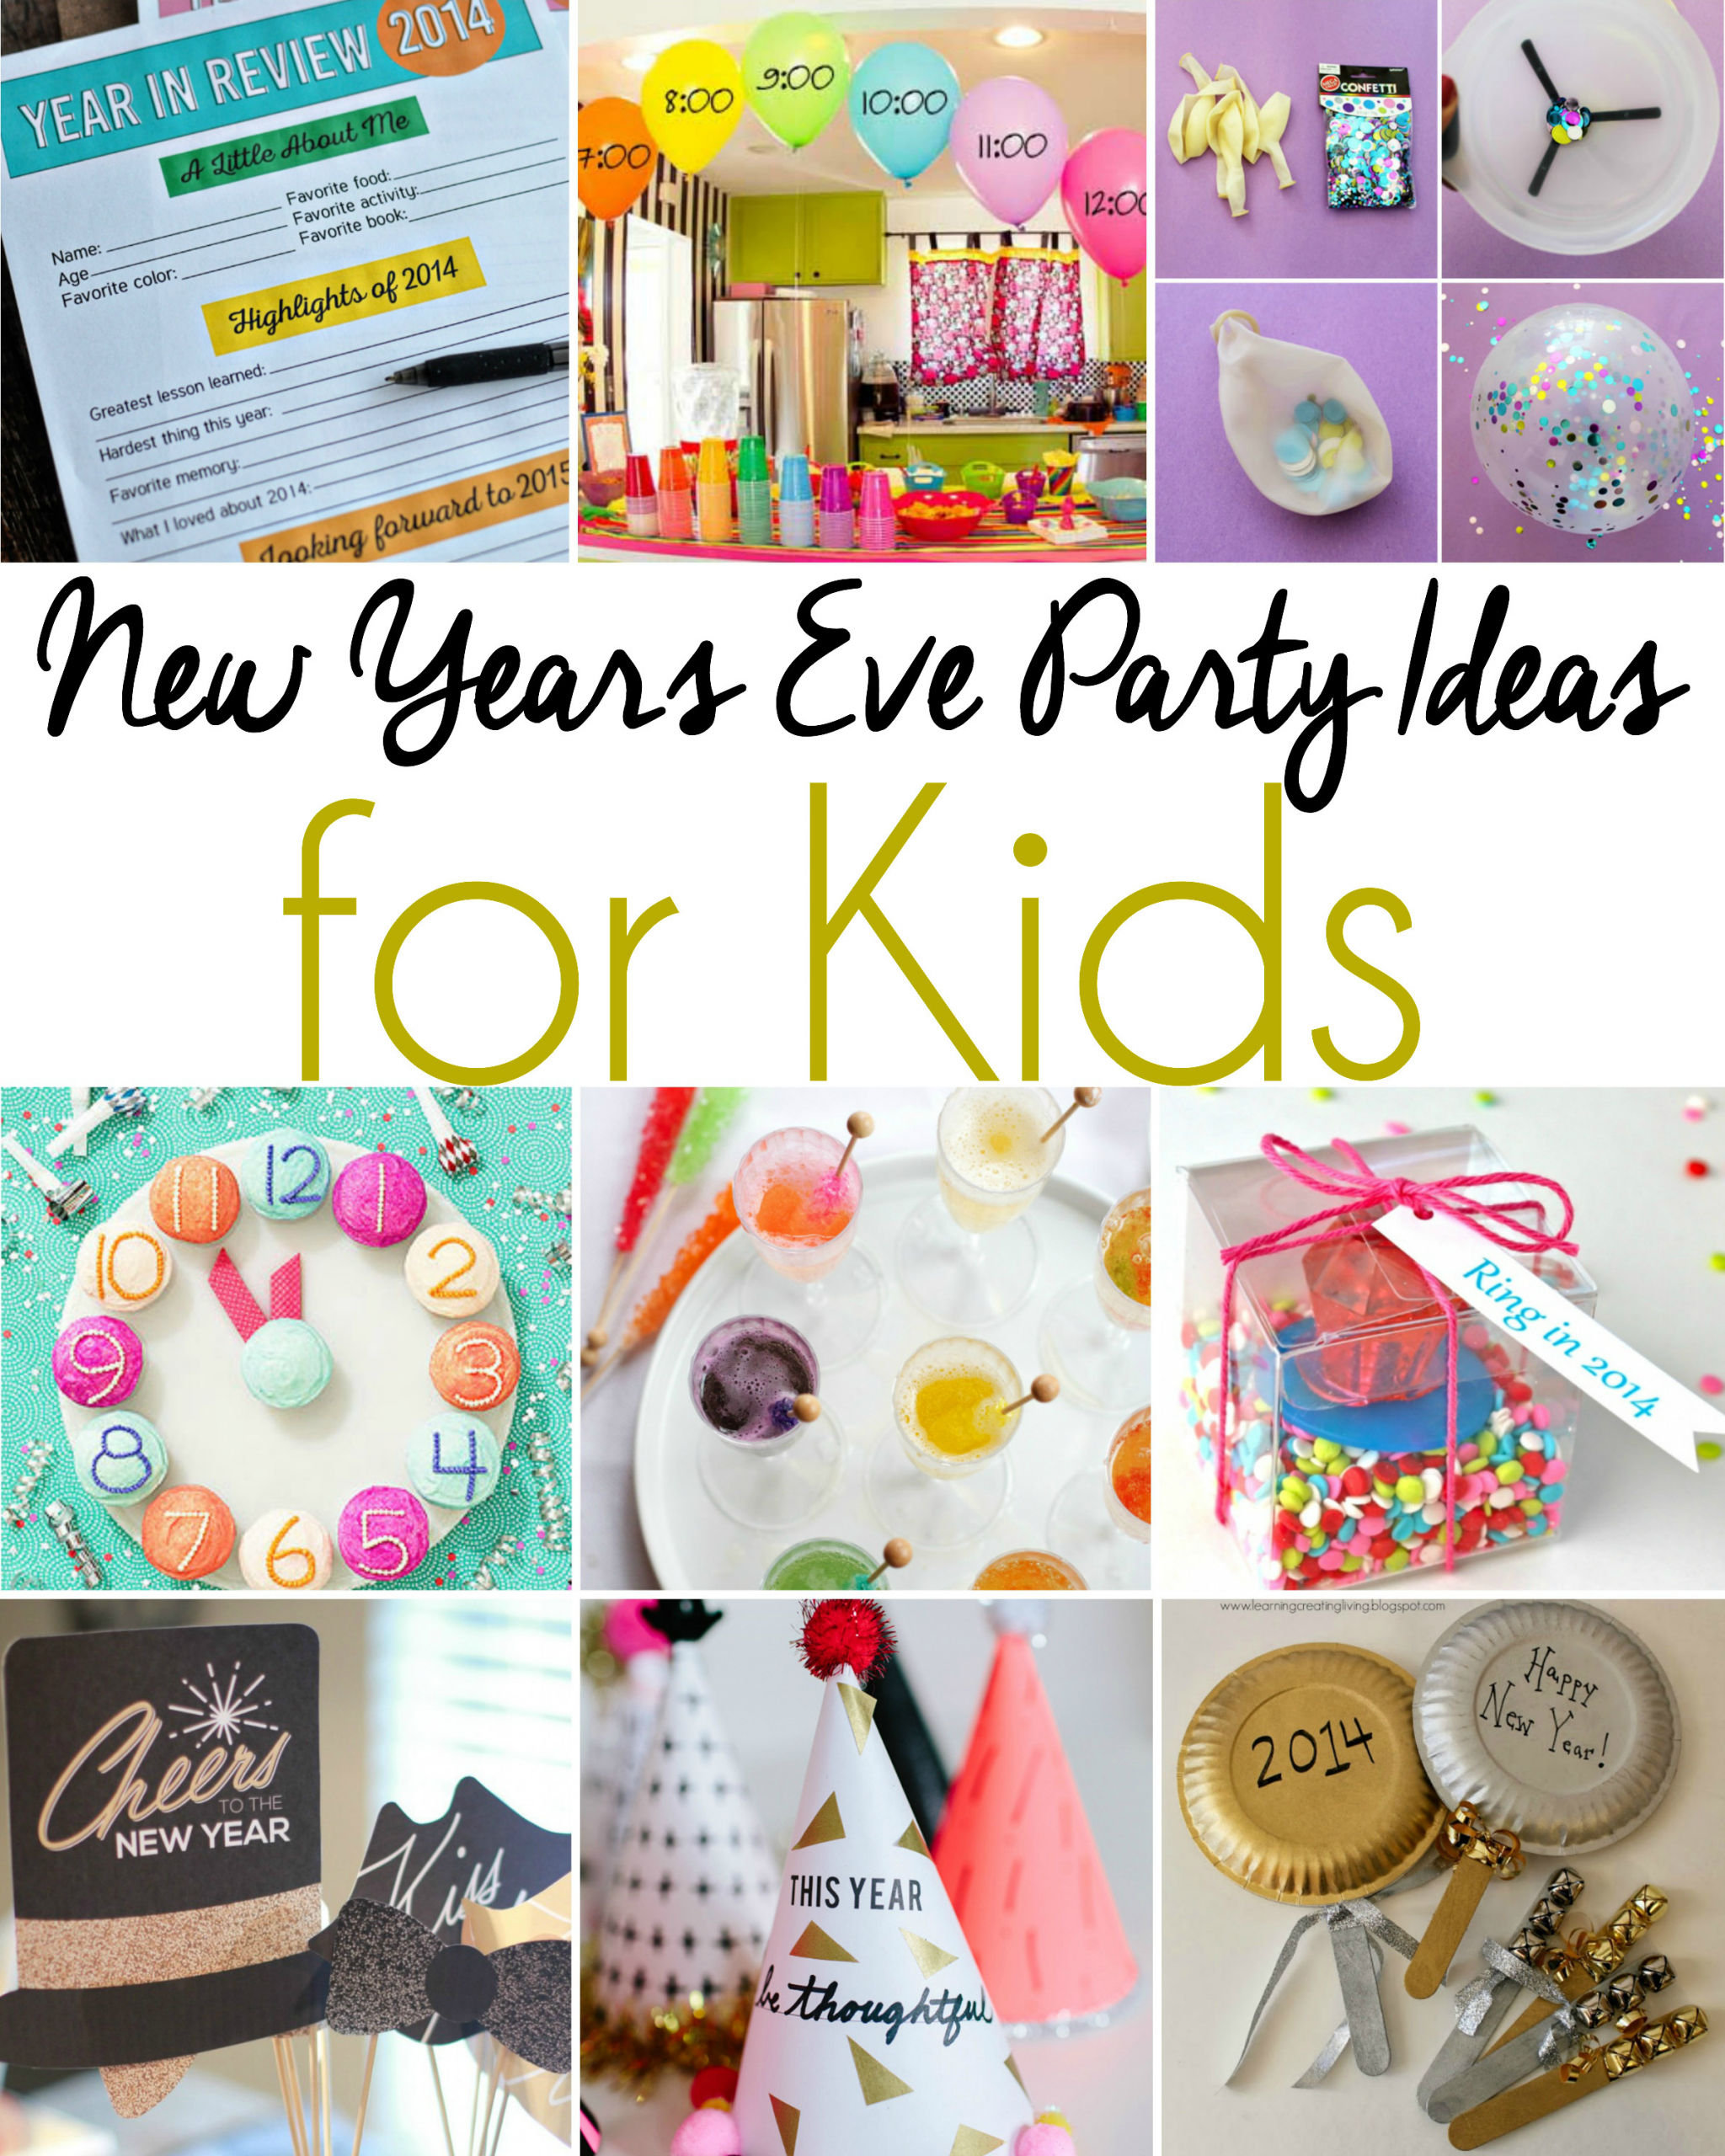 New Year Eve Party Games For Kids
 New Years Eve Party Ideas for Kids